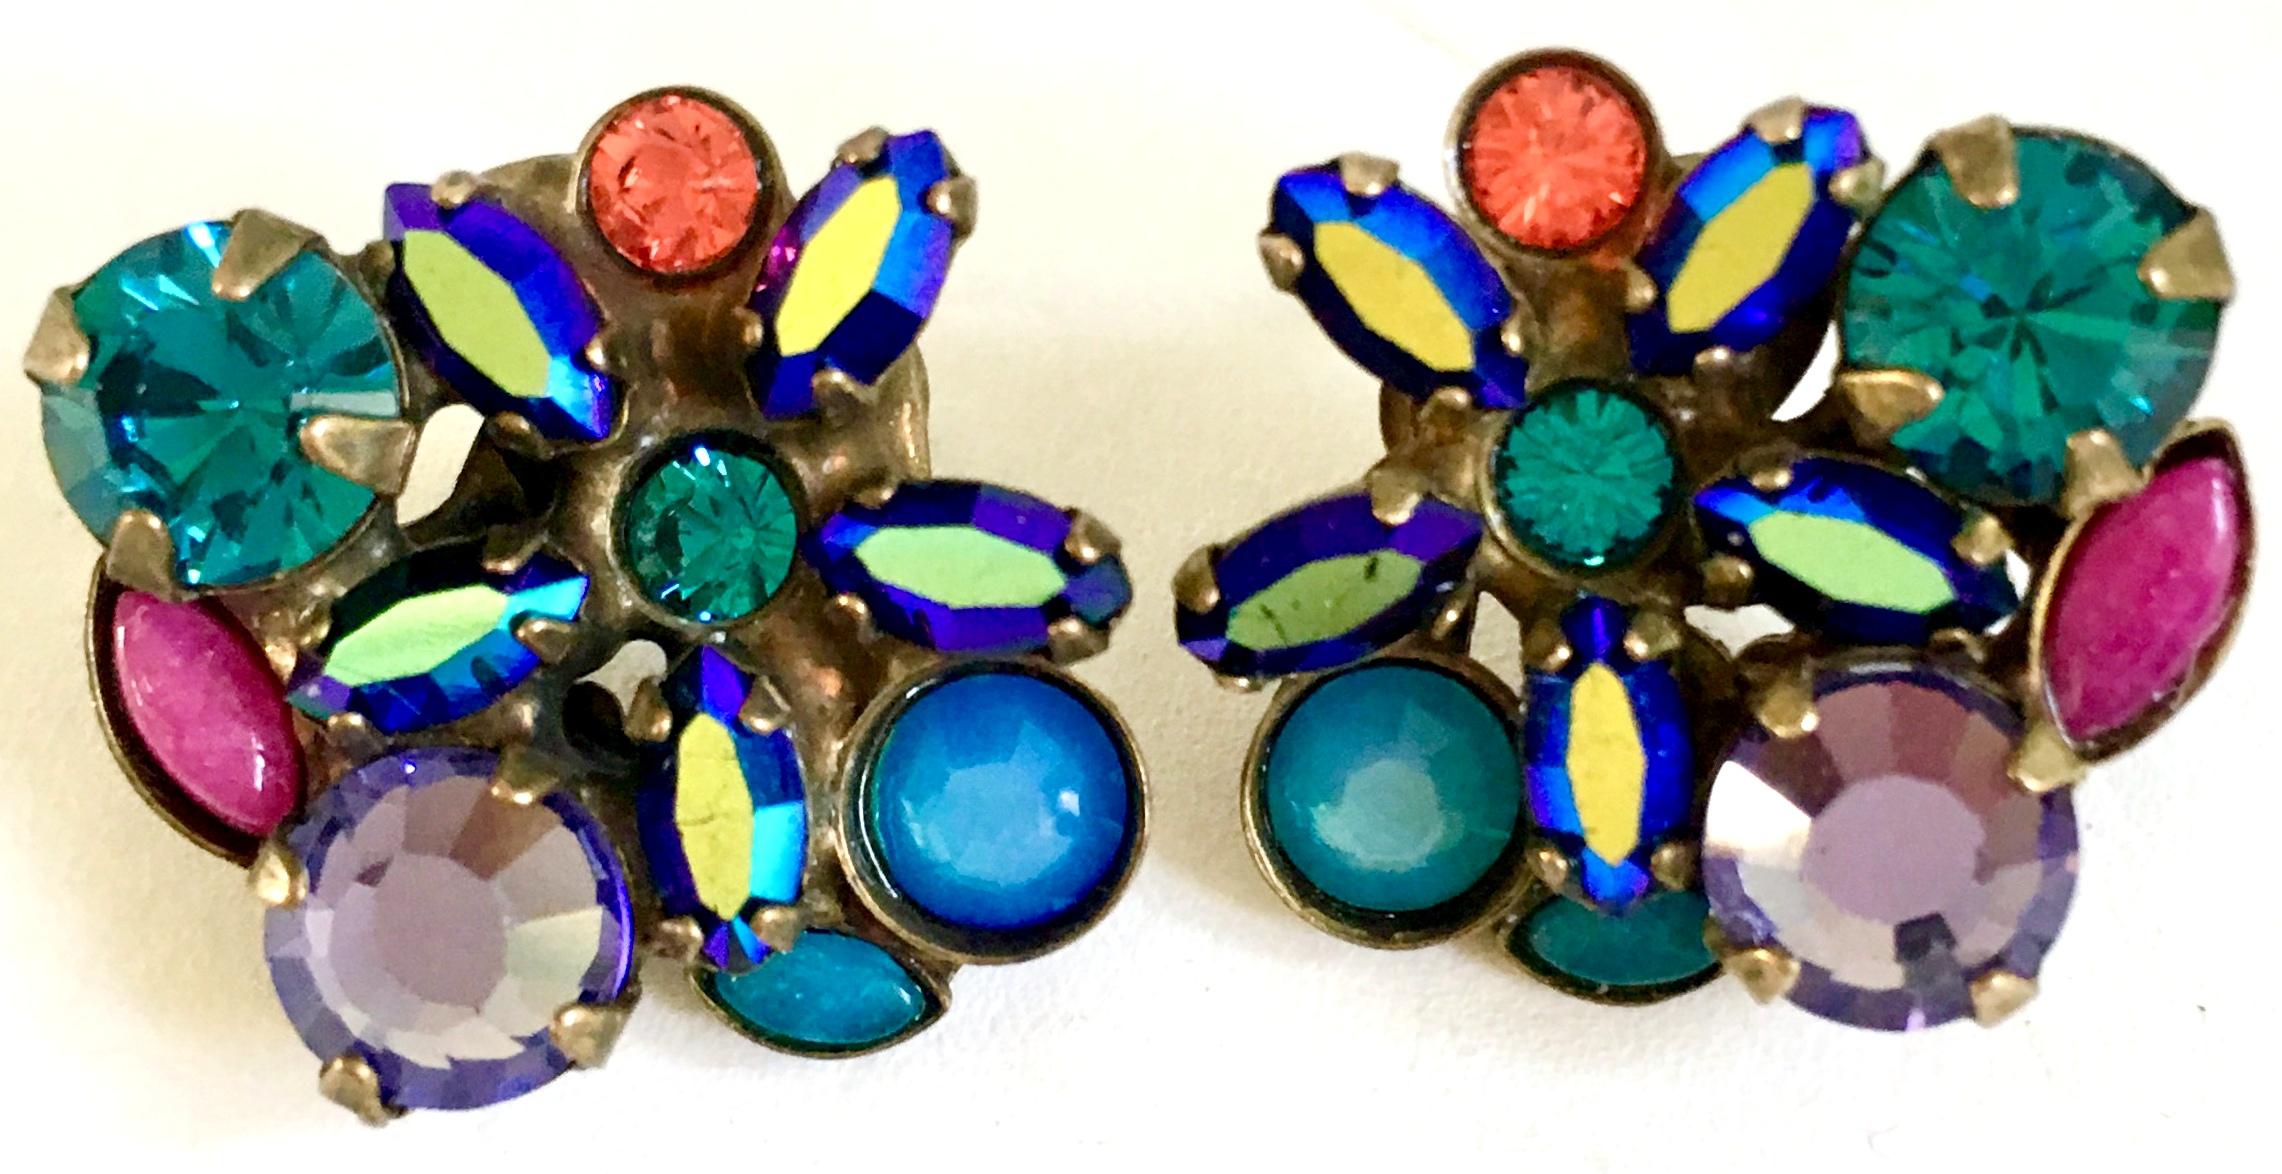 21st Century Gold & Swarovski crystal stud pierced Earrings By, Sorrelli. These bronze tone plate with prong set Swarovski crystal rhinestone abstract flower stud earrings are diminutive, dramatic and vibrant .
Each piece is signed on the underside,